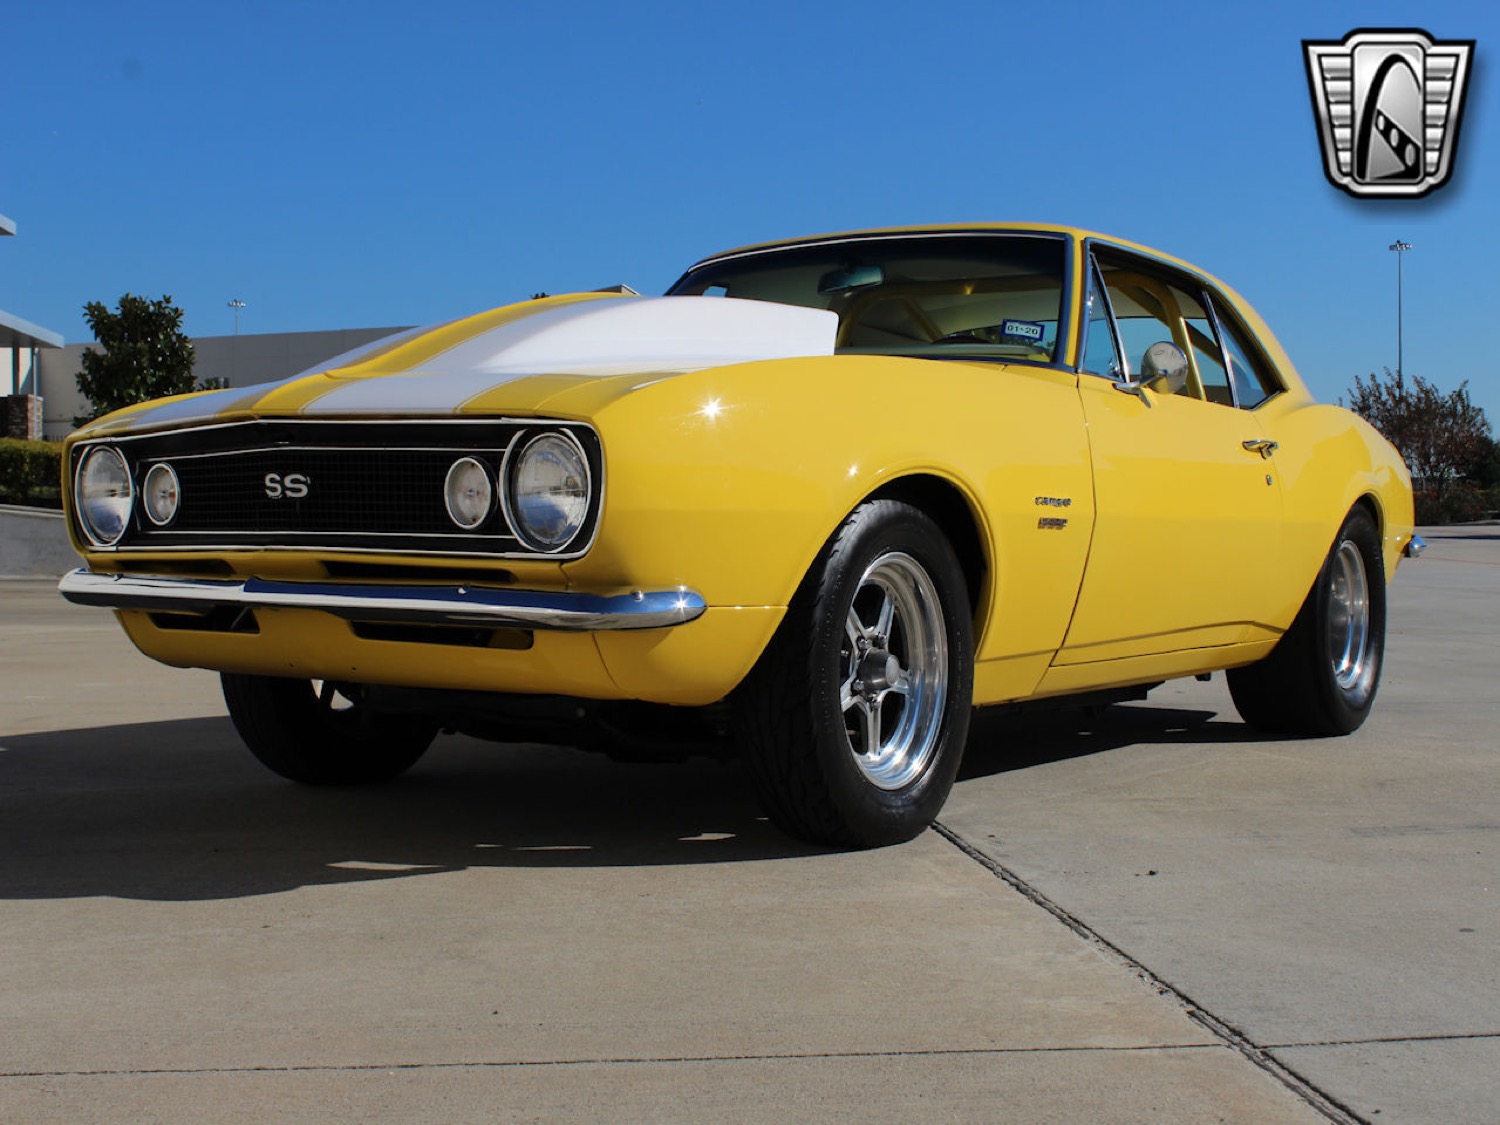 1967 Chevrolet Camaro SS LS3 Restomod Up For Sale: Video | GM Authority